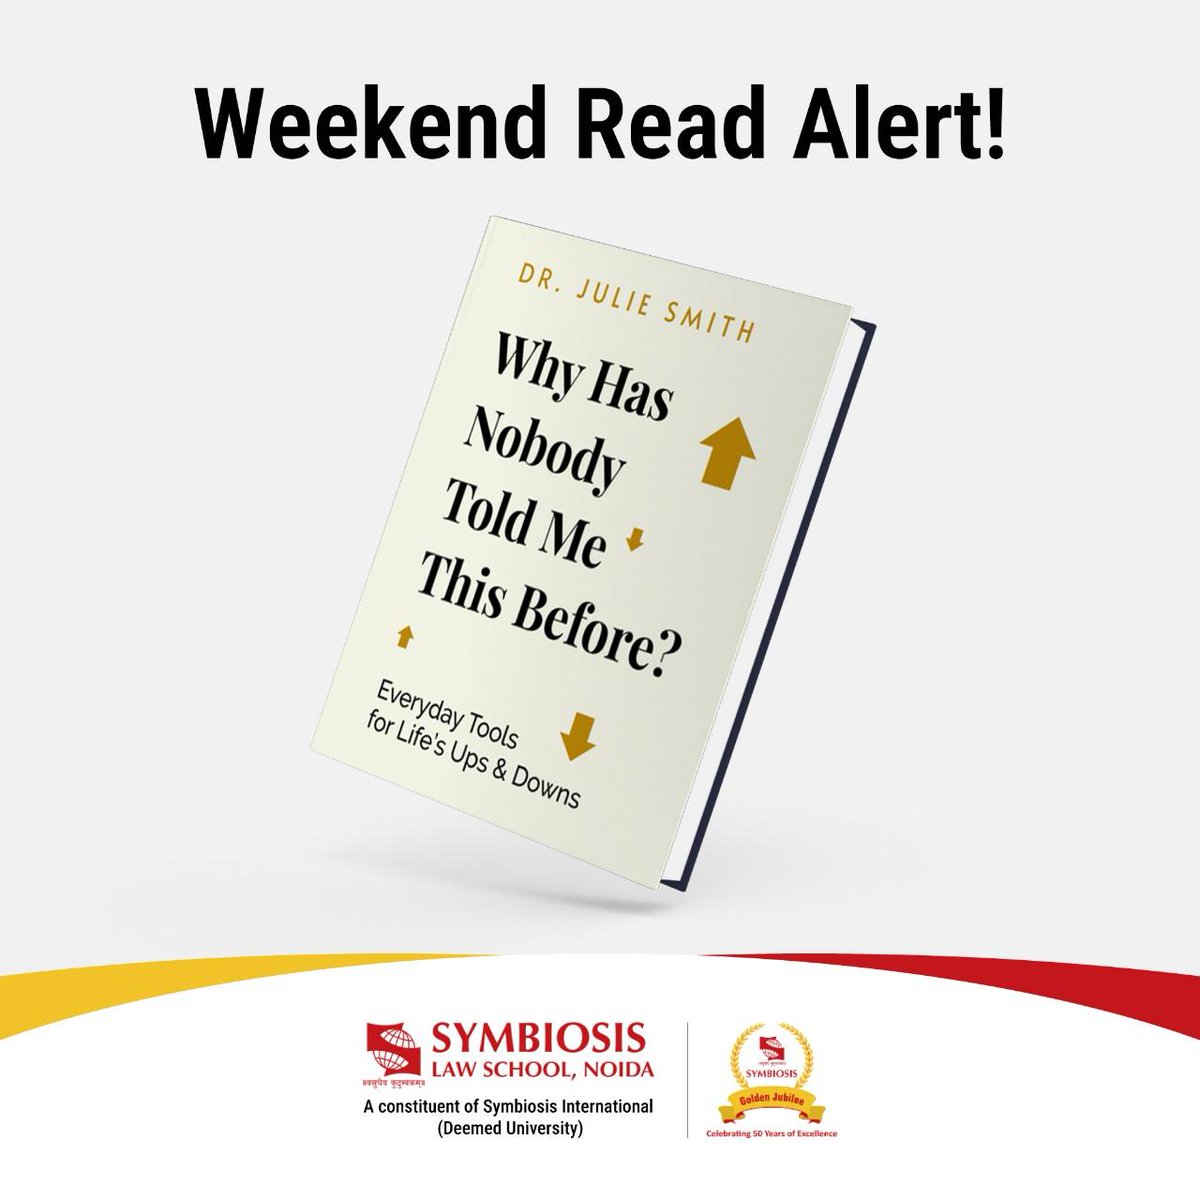 Discover strategies from a clinical psychologist to boost mental health, tackle anxiety and build confidence. Get daily, easy-to-follow advice for well-being. . . . #sls #symbiosis #symbiosislawschool #noida #weekend #weekendread #mentalwellbeing #mentalhealth